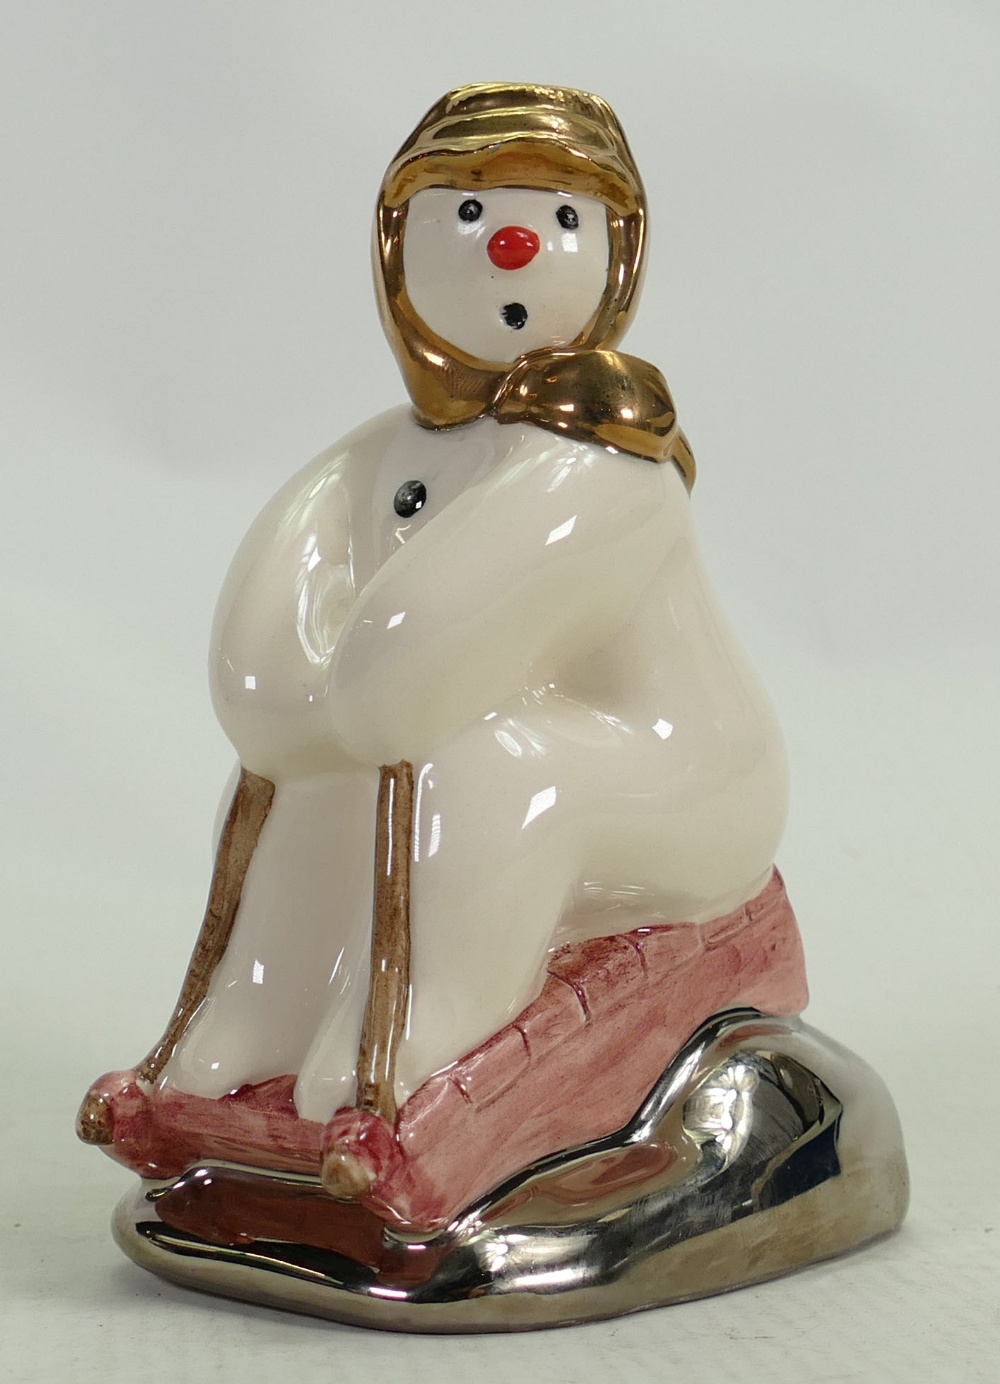 Royal Doulton Snowman prototype figure Tobogganing: In a different colourway with silver & gold